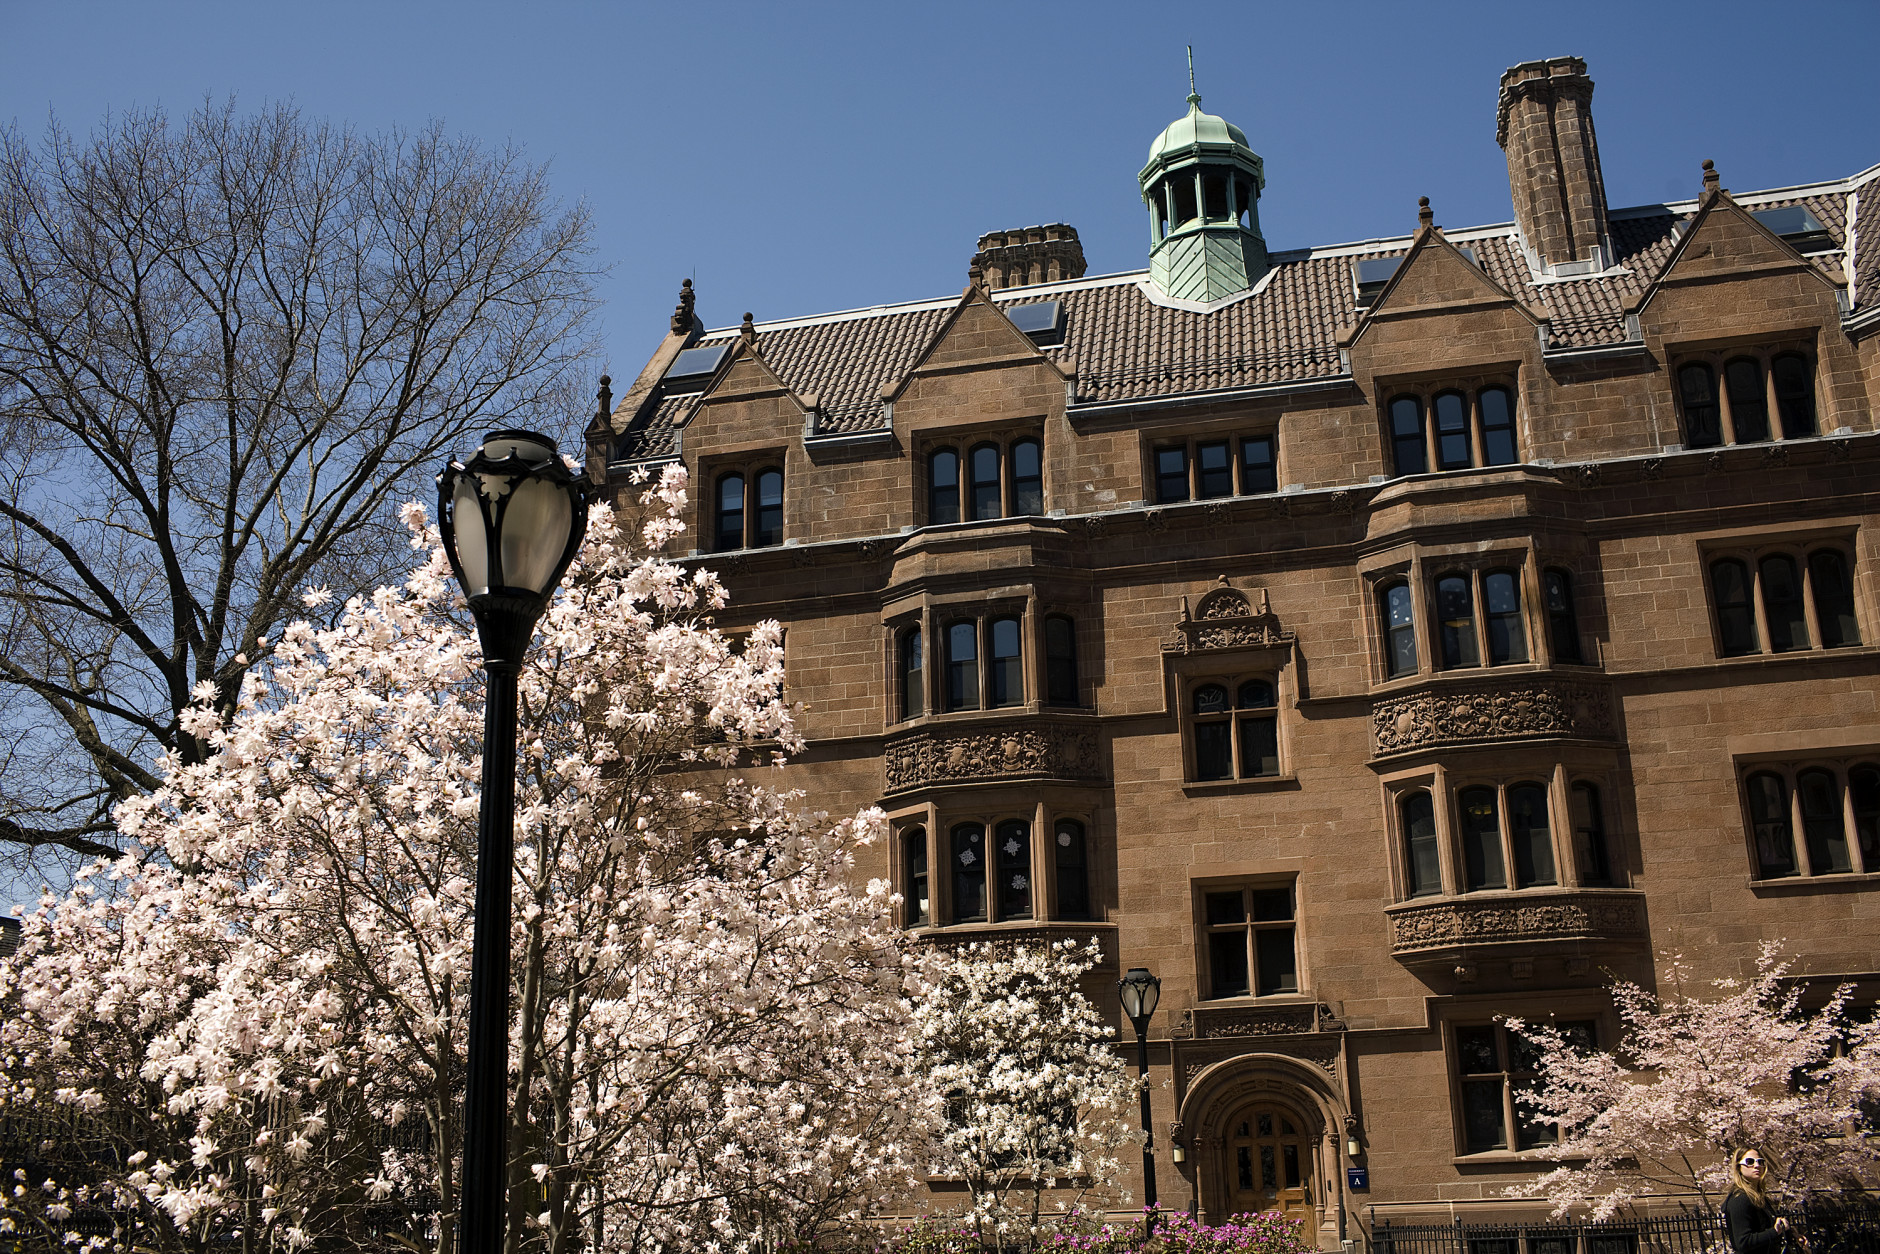 NEW HAVEN, CT - APRIL 16:  Trees bloom on the campus of Yale University April 16, 2008 in New Haven, Connecticut. New Haven boasts many educational and cultural offerings that attract visitors to the city.    (Photo by Christopher Capozziello/Getty Images)